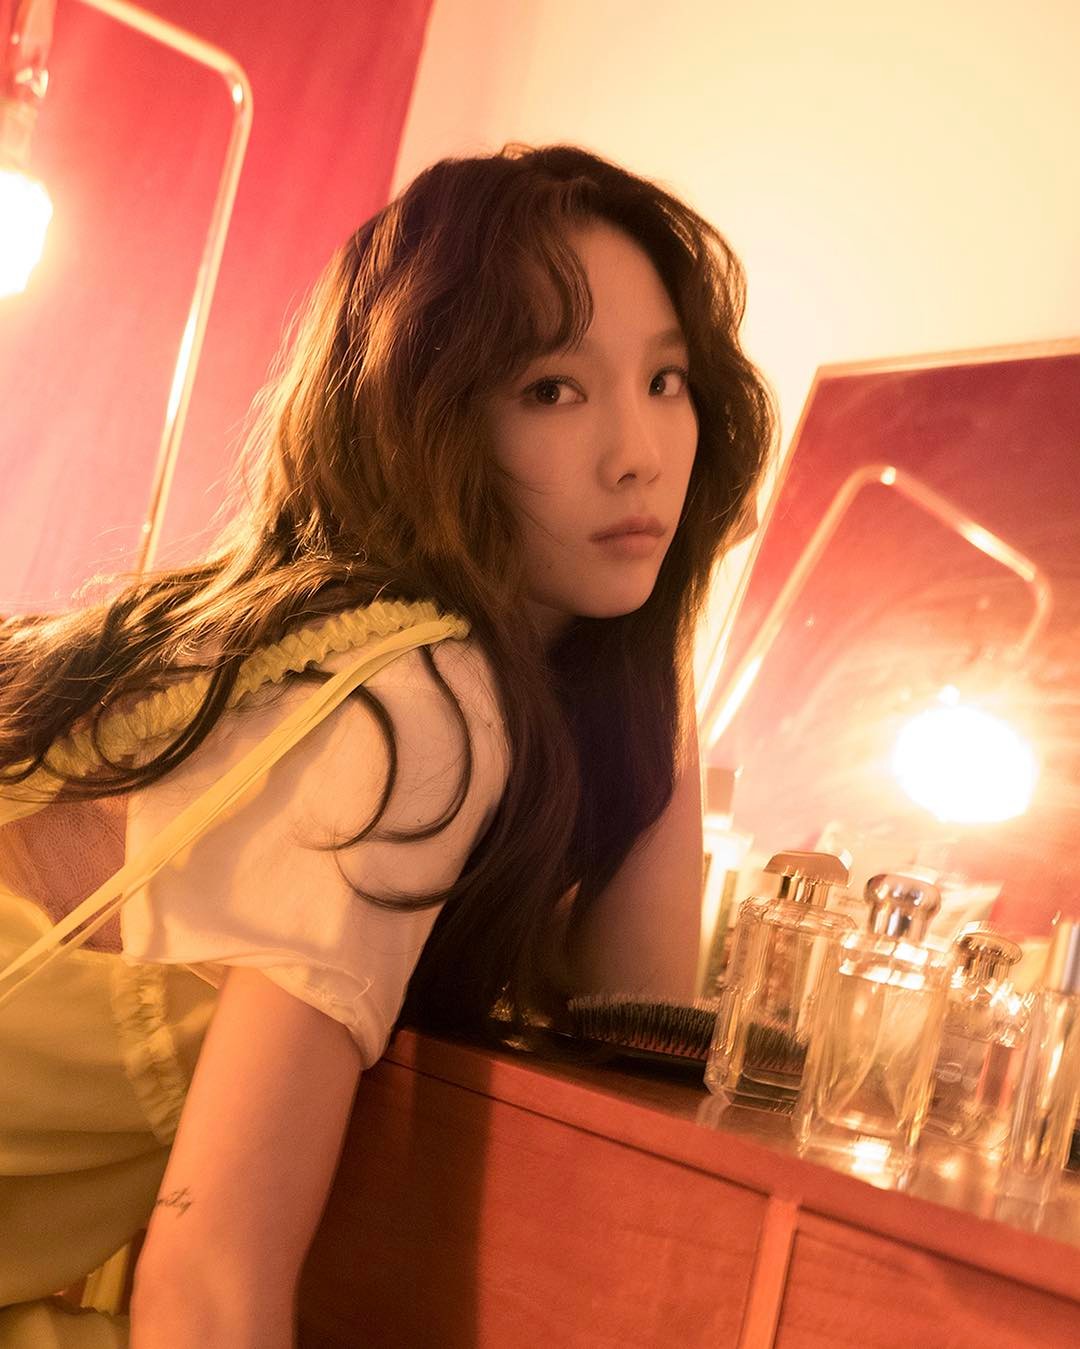 Snsd Taeyeon And Her Teaser Pictures For My Voice Her First Full Album Wonderful Generation